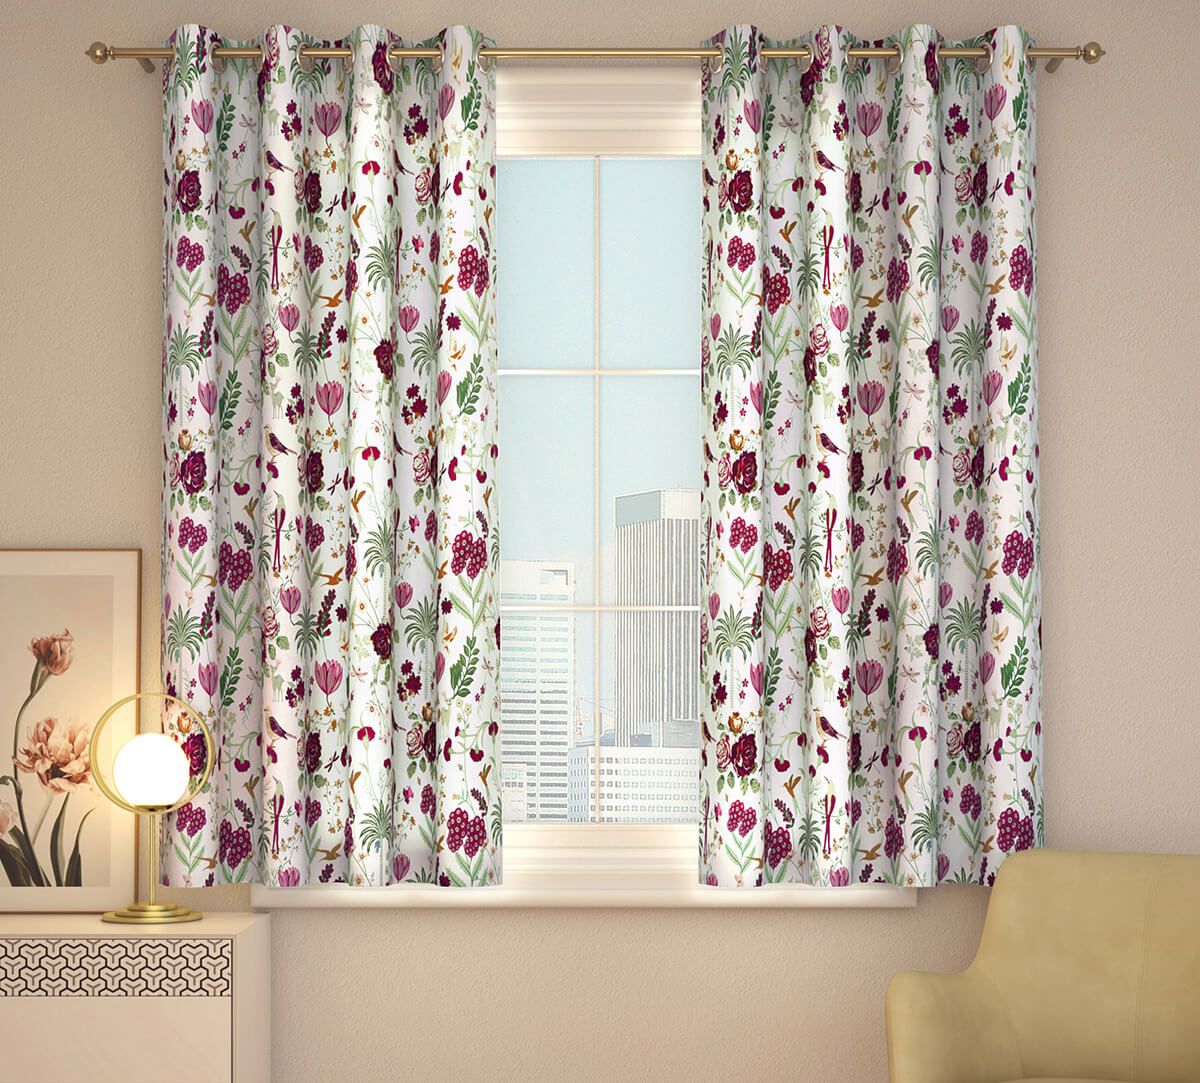 Shop for Window Curtains online